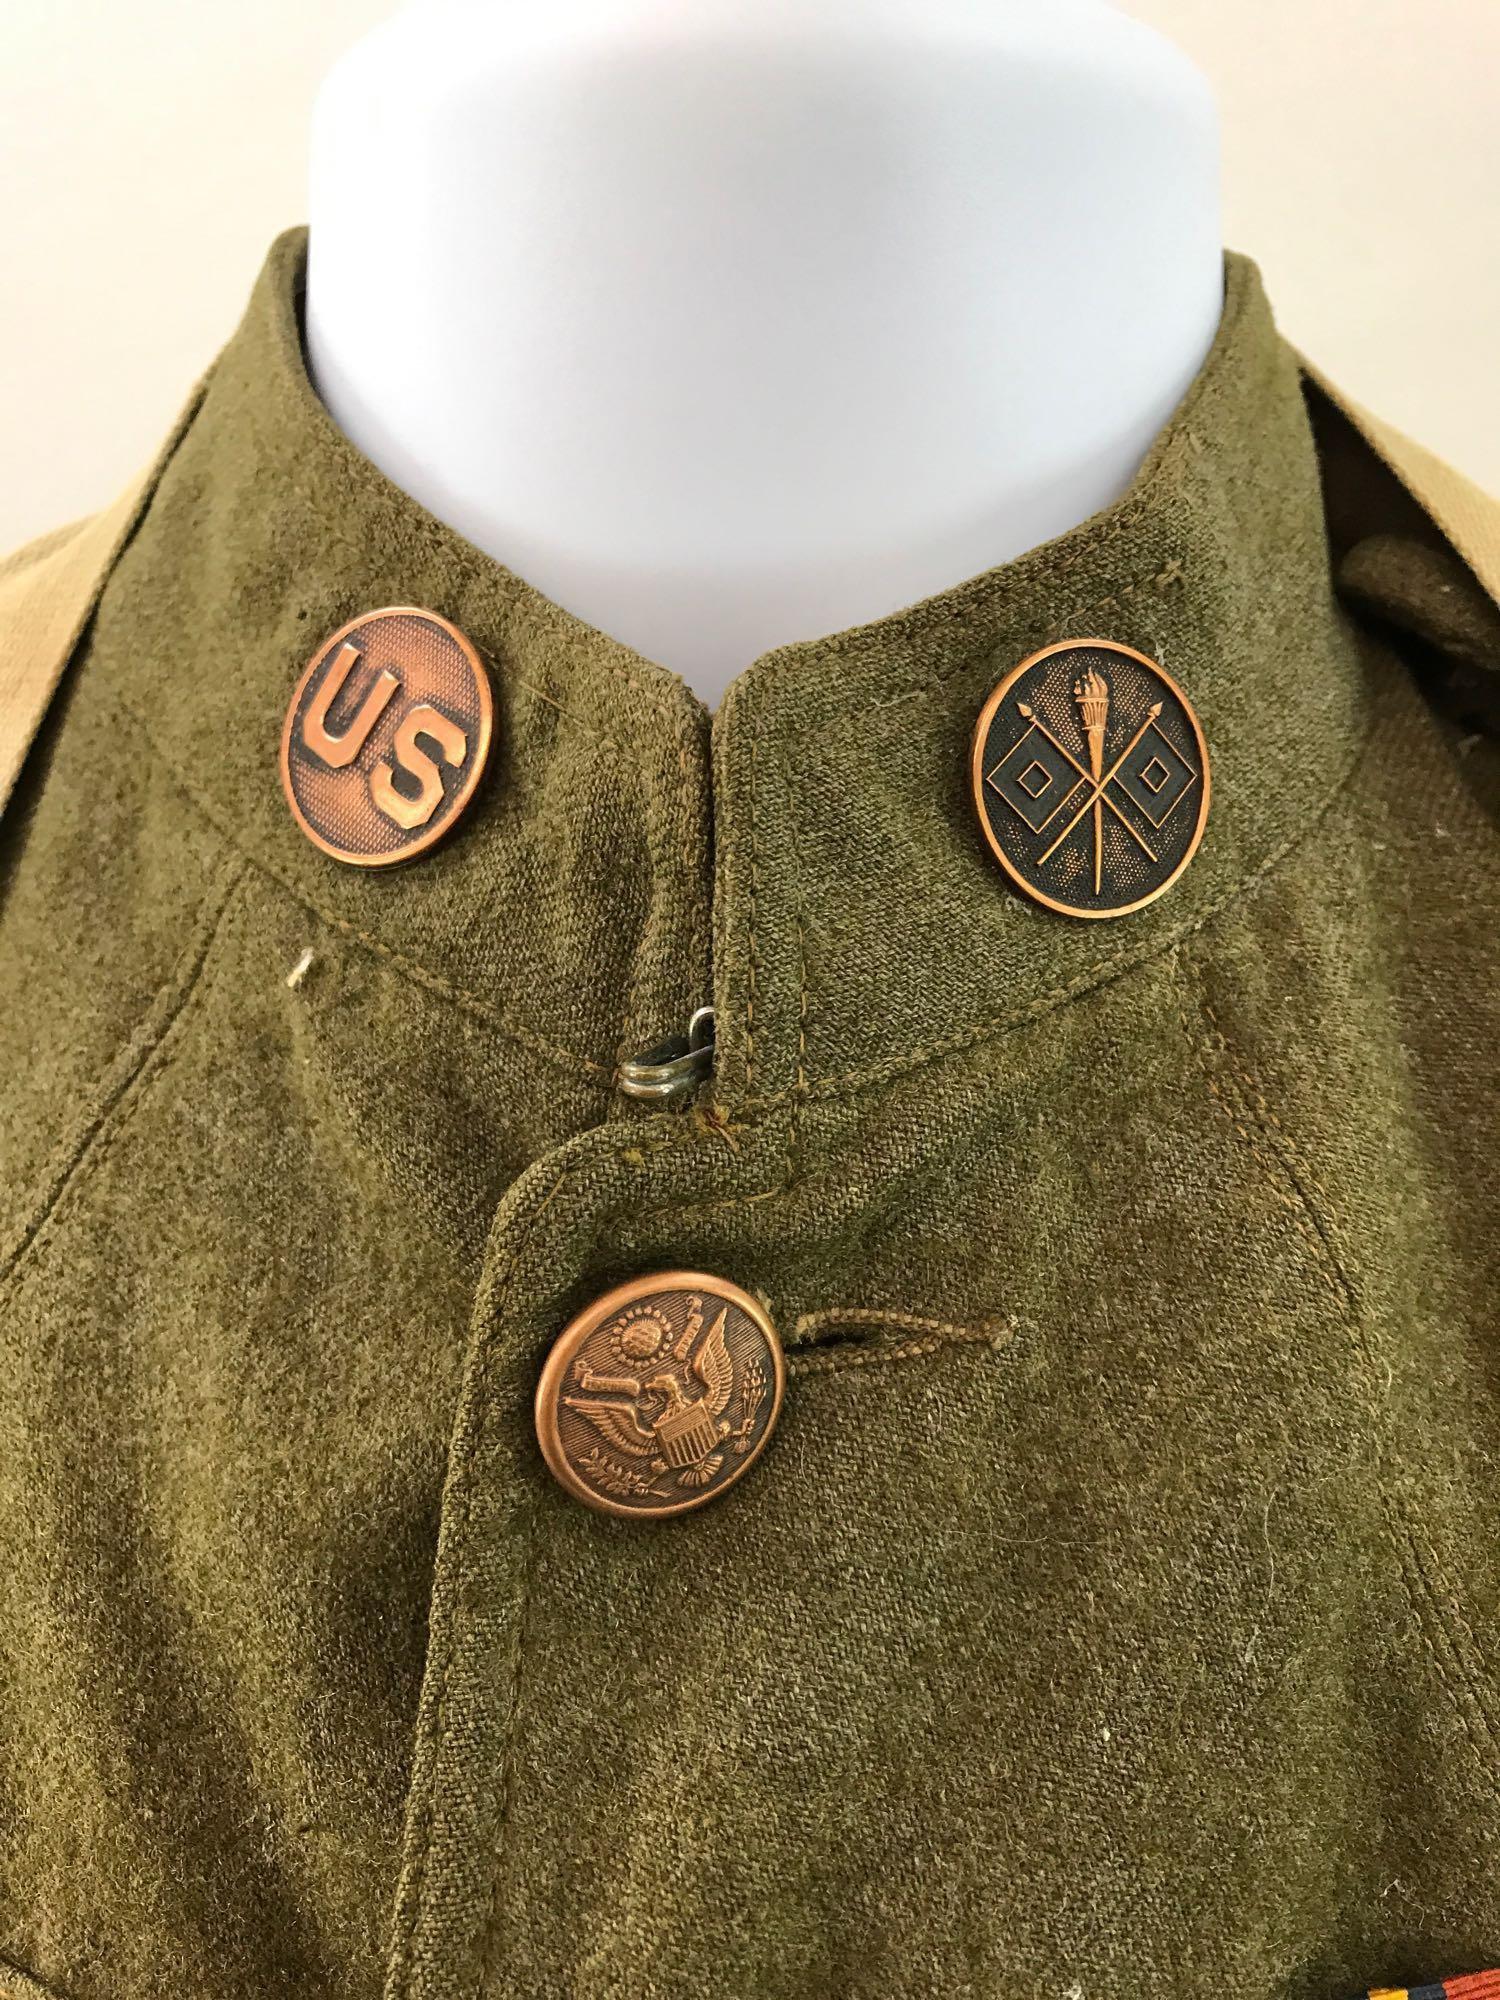 WW1 U.S. Army Signal Corps Tunic with Medals and Grenade Pouch